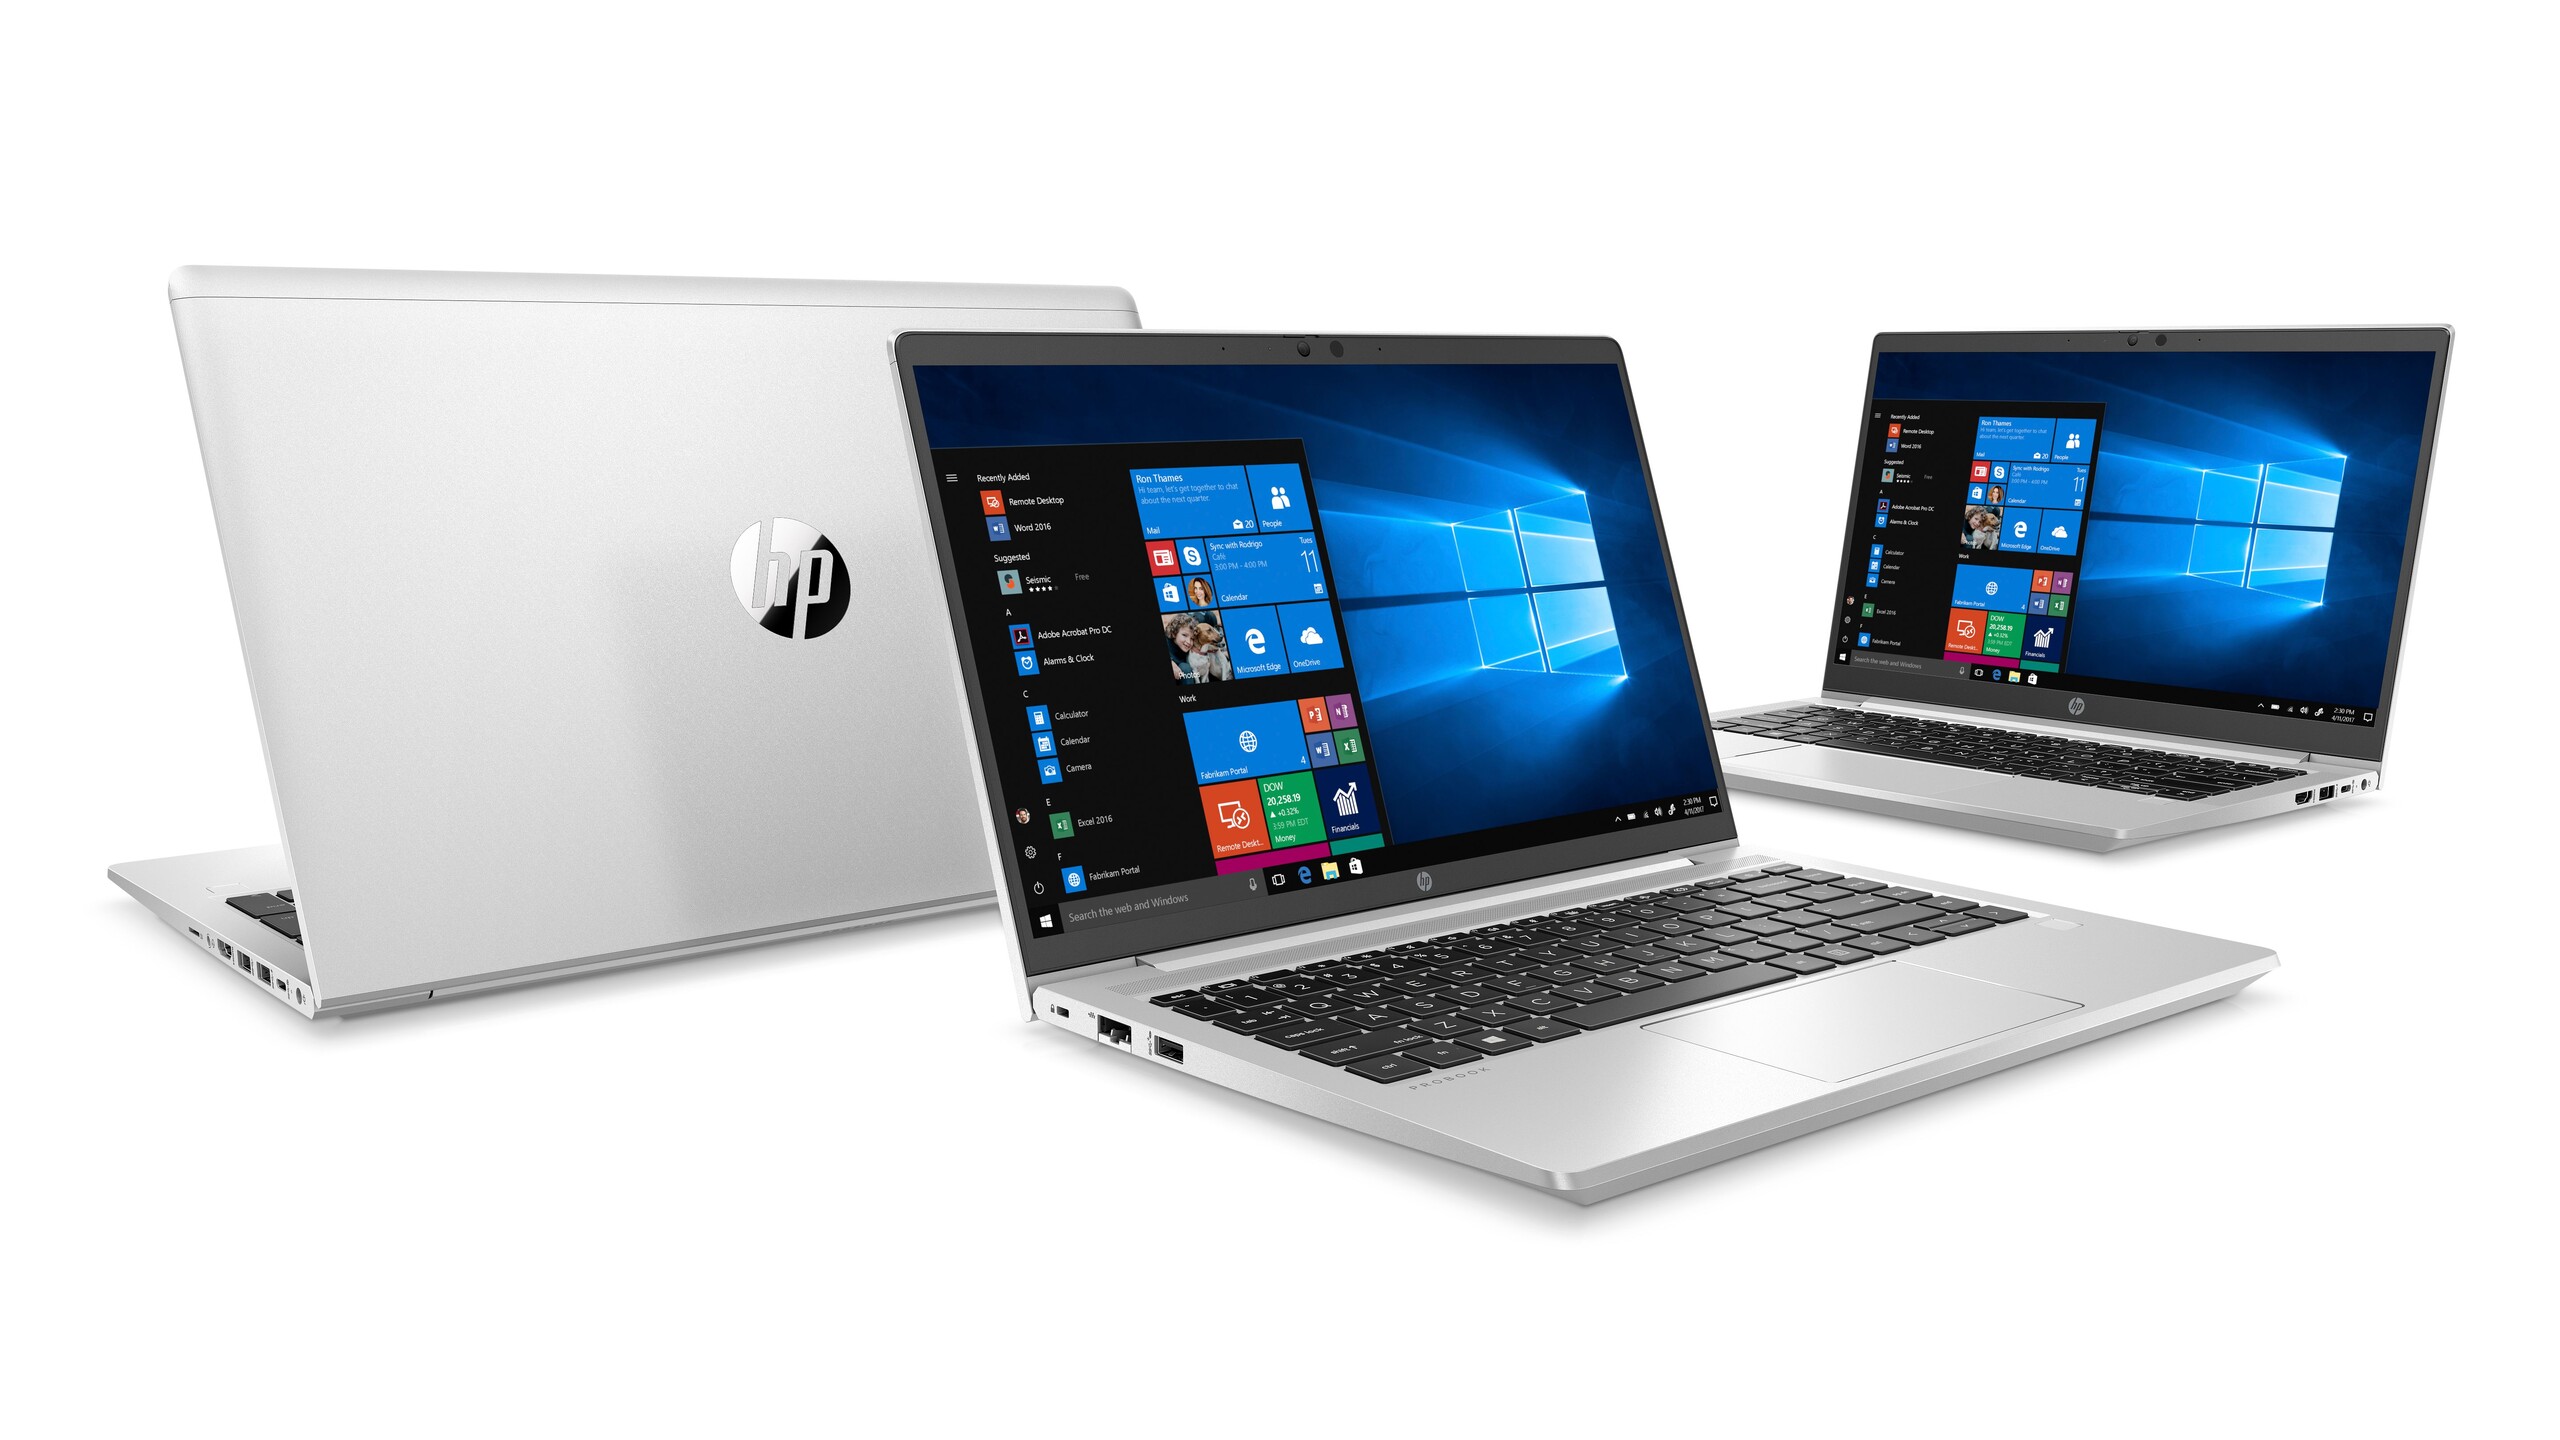 HP revamps ProBook 400 line with Tiger Lake CPUs and Intel Iris Xe Graphics  or Nvidia GeForce MX450 GPUs - NotebookCheck.net News